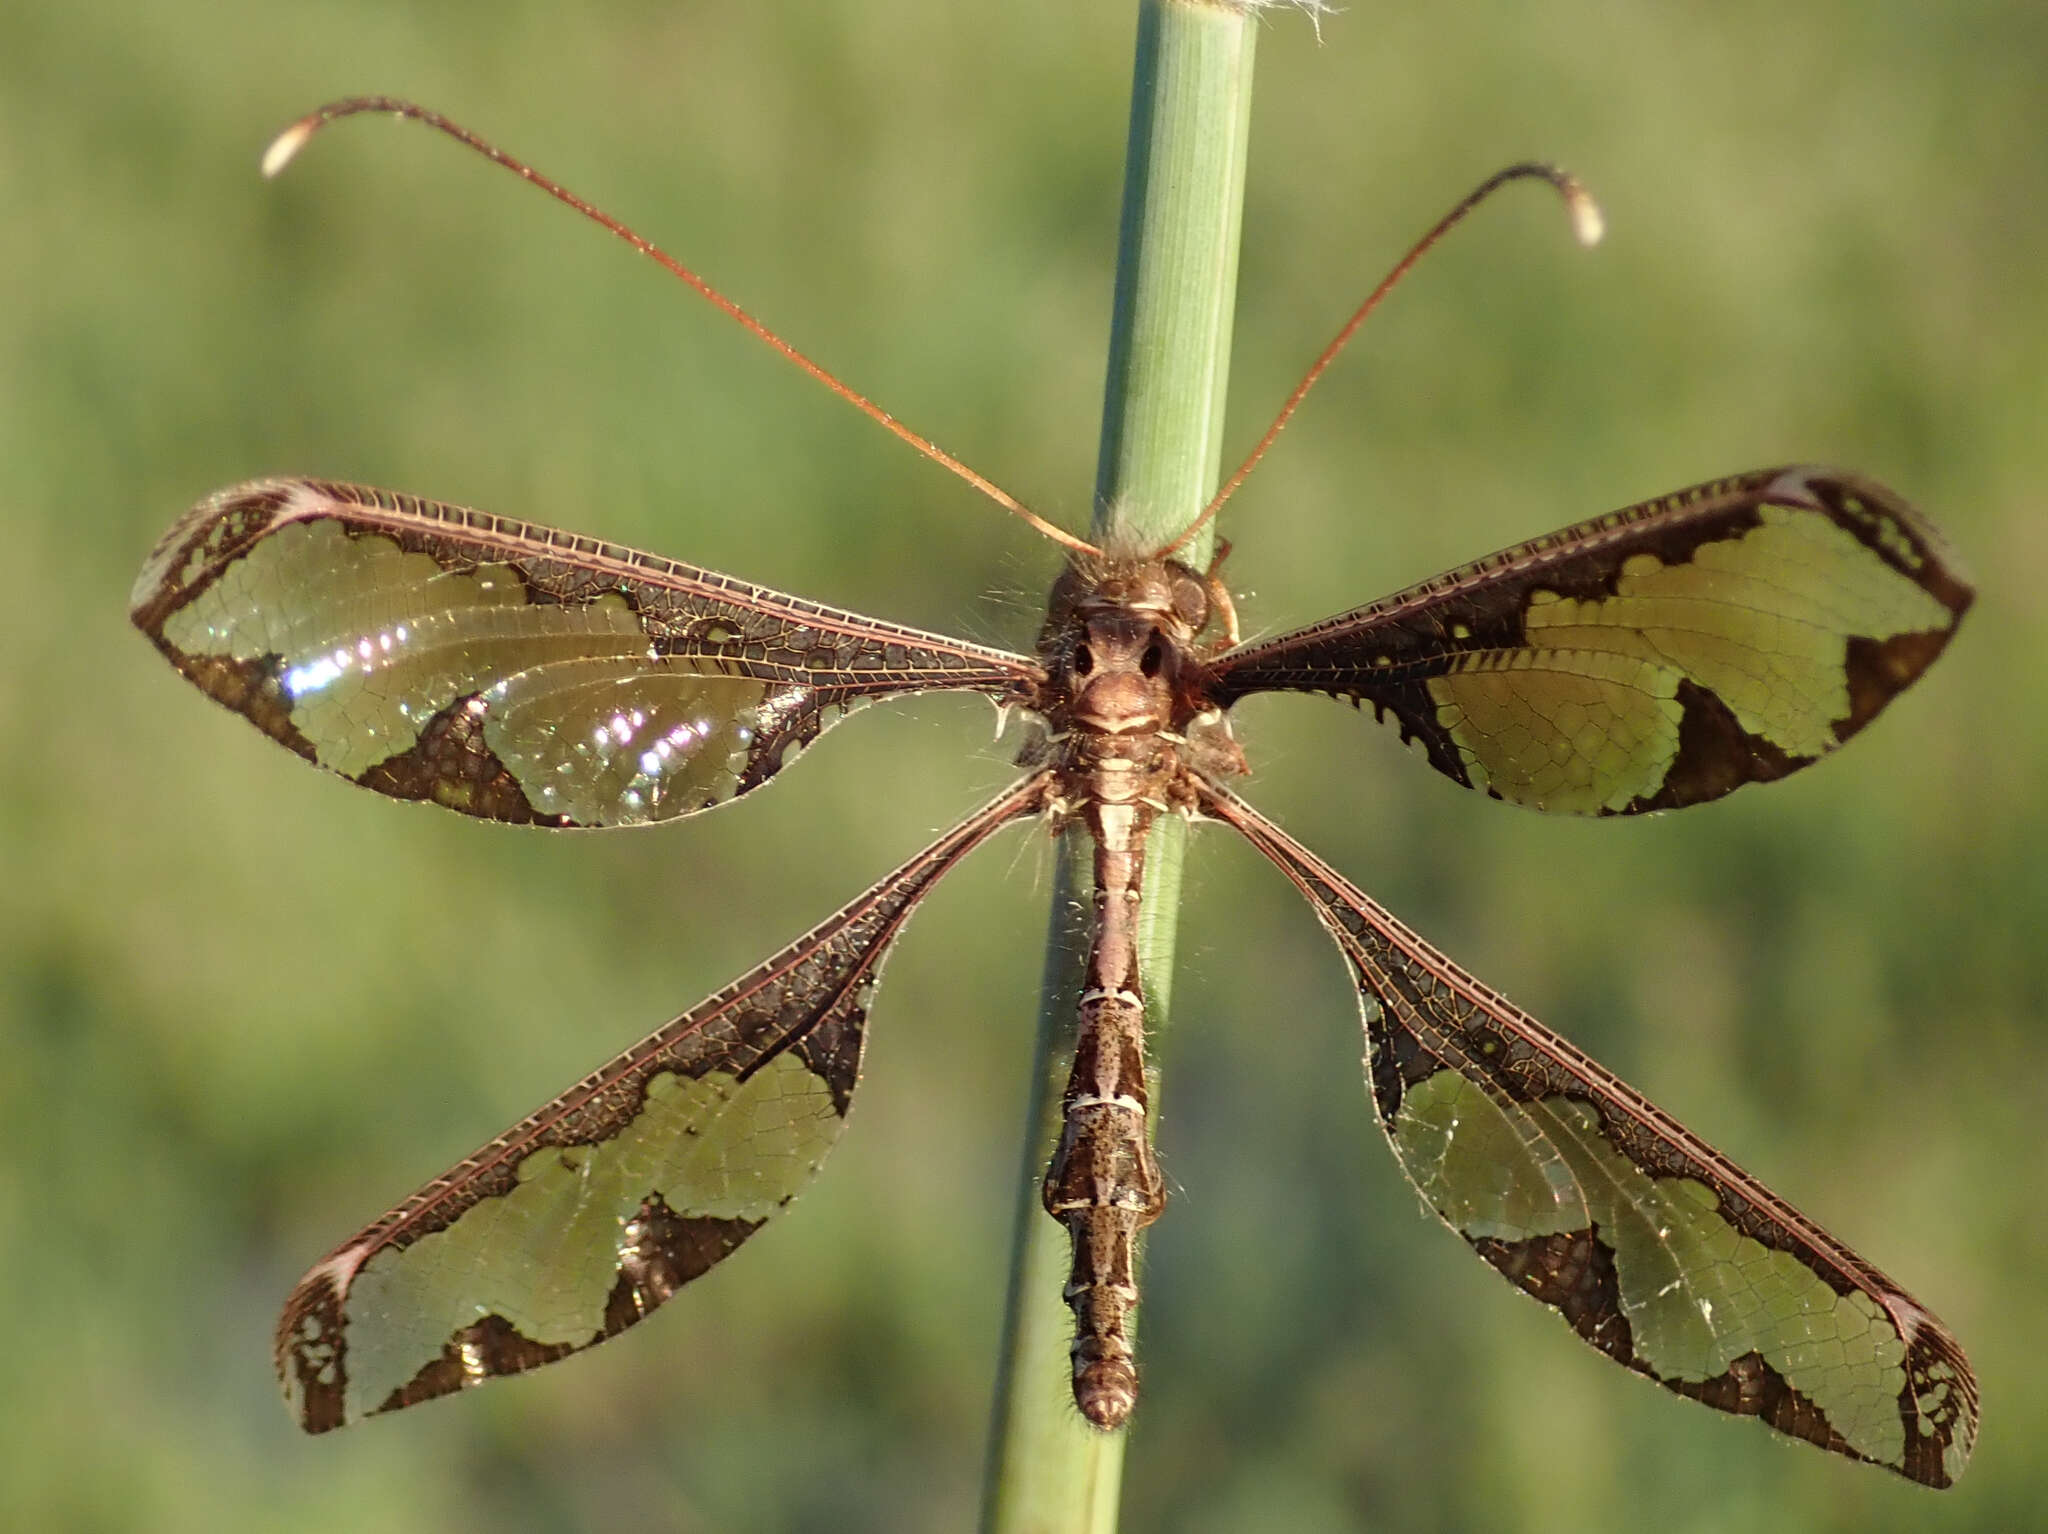 Image of Blotched Long-horned Owlfly